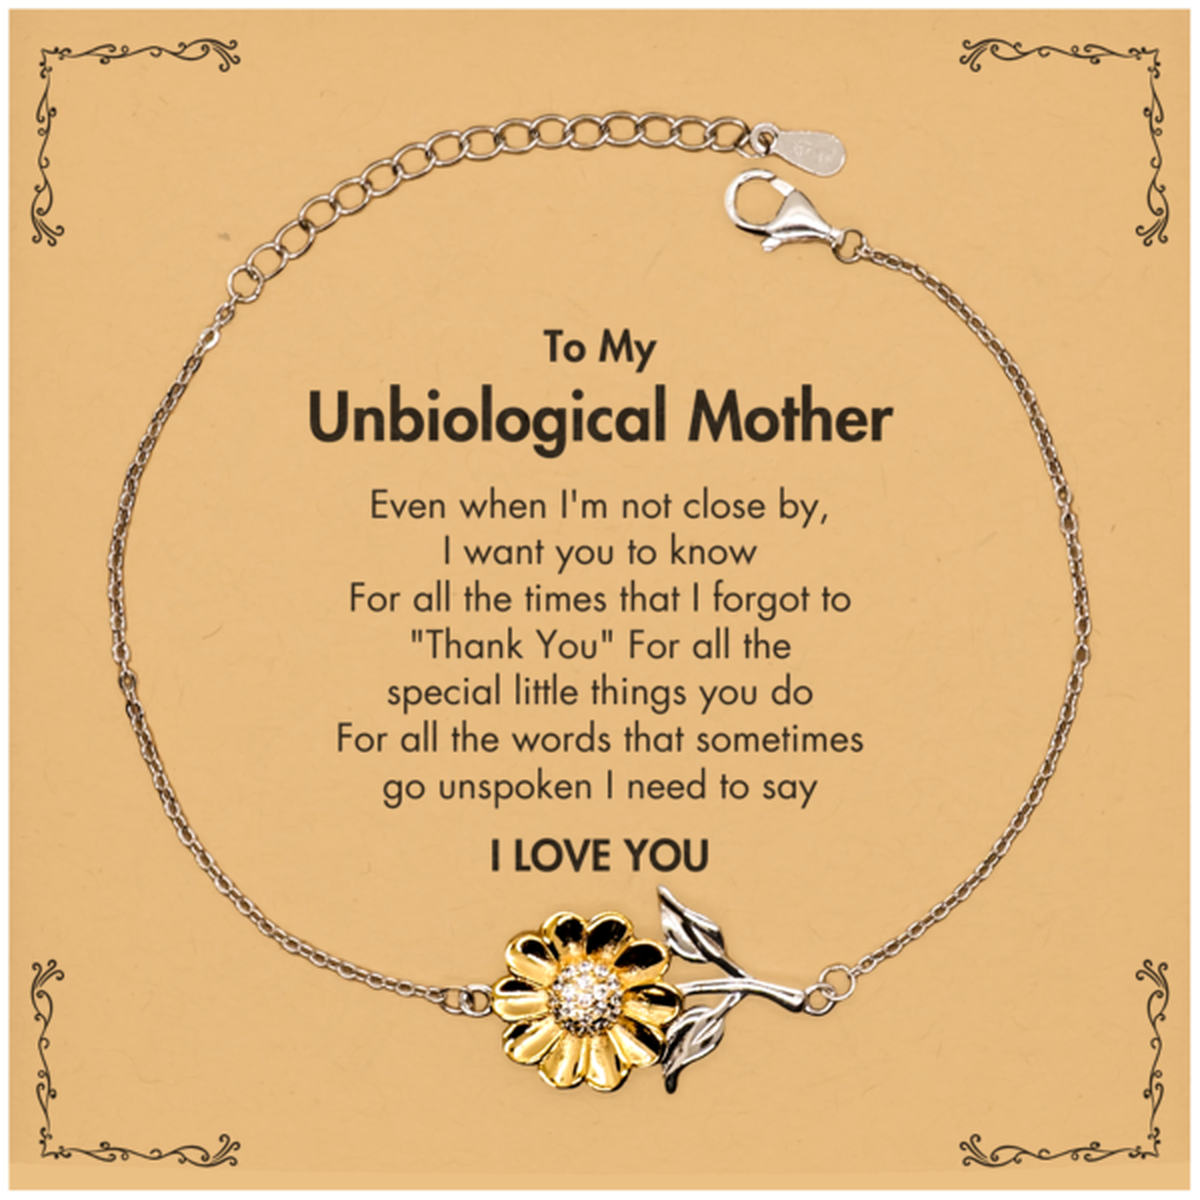 Thank You Gifts for Unbiological Mother, Keepsake Sunflower Bracelet Gifts for Unbiological Mother Birthday Mother's day Father's Day Unbiological Mother For all the words That sometimes go unspoken I need to say I LOVE YOU